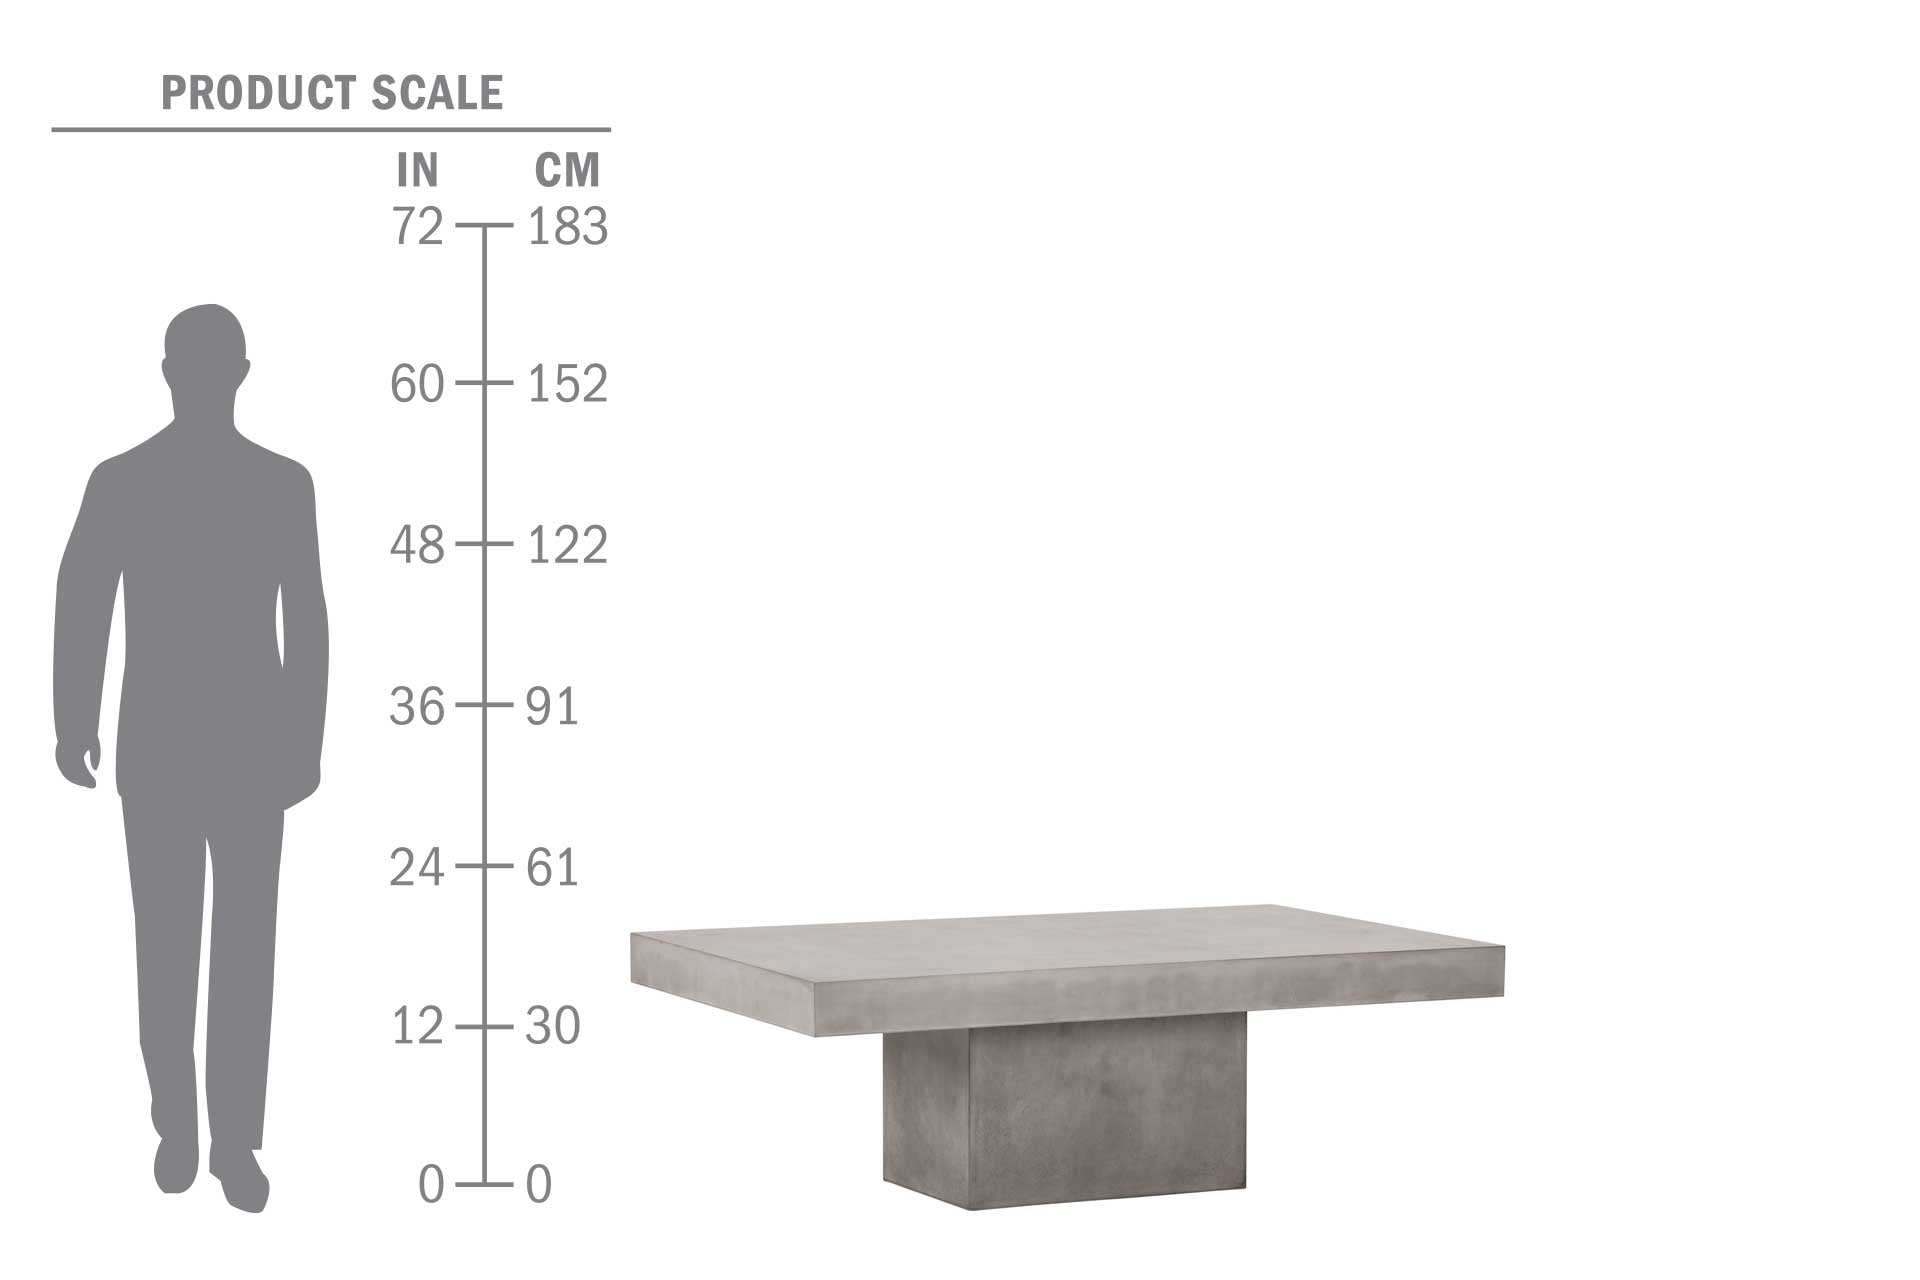 Terrace Concrete Coffee Table - Slate Gray Outdoor Coffee Table